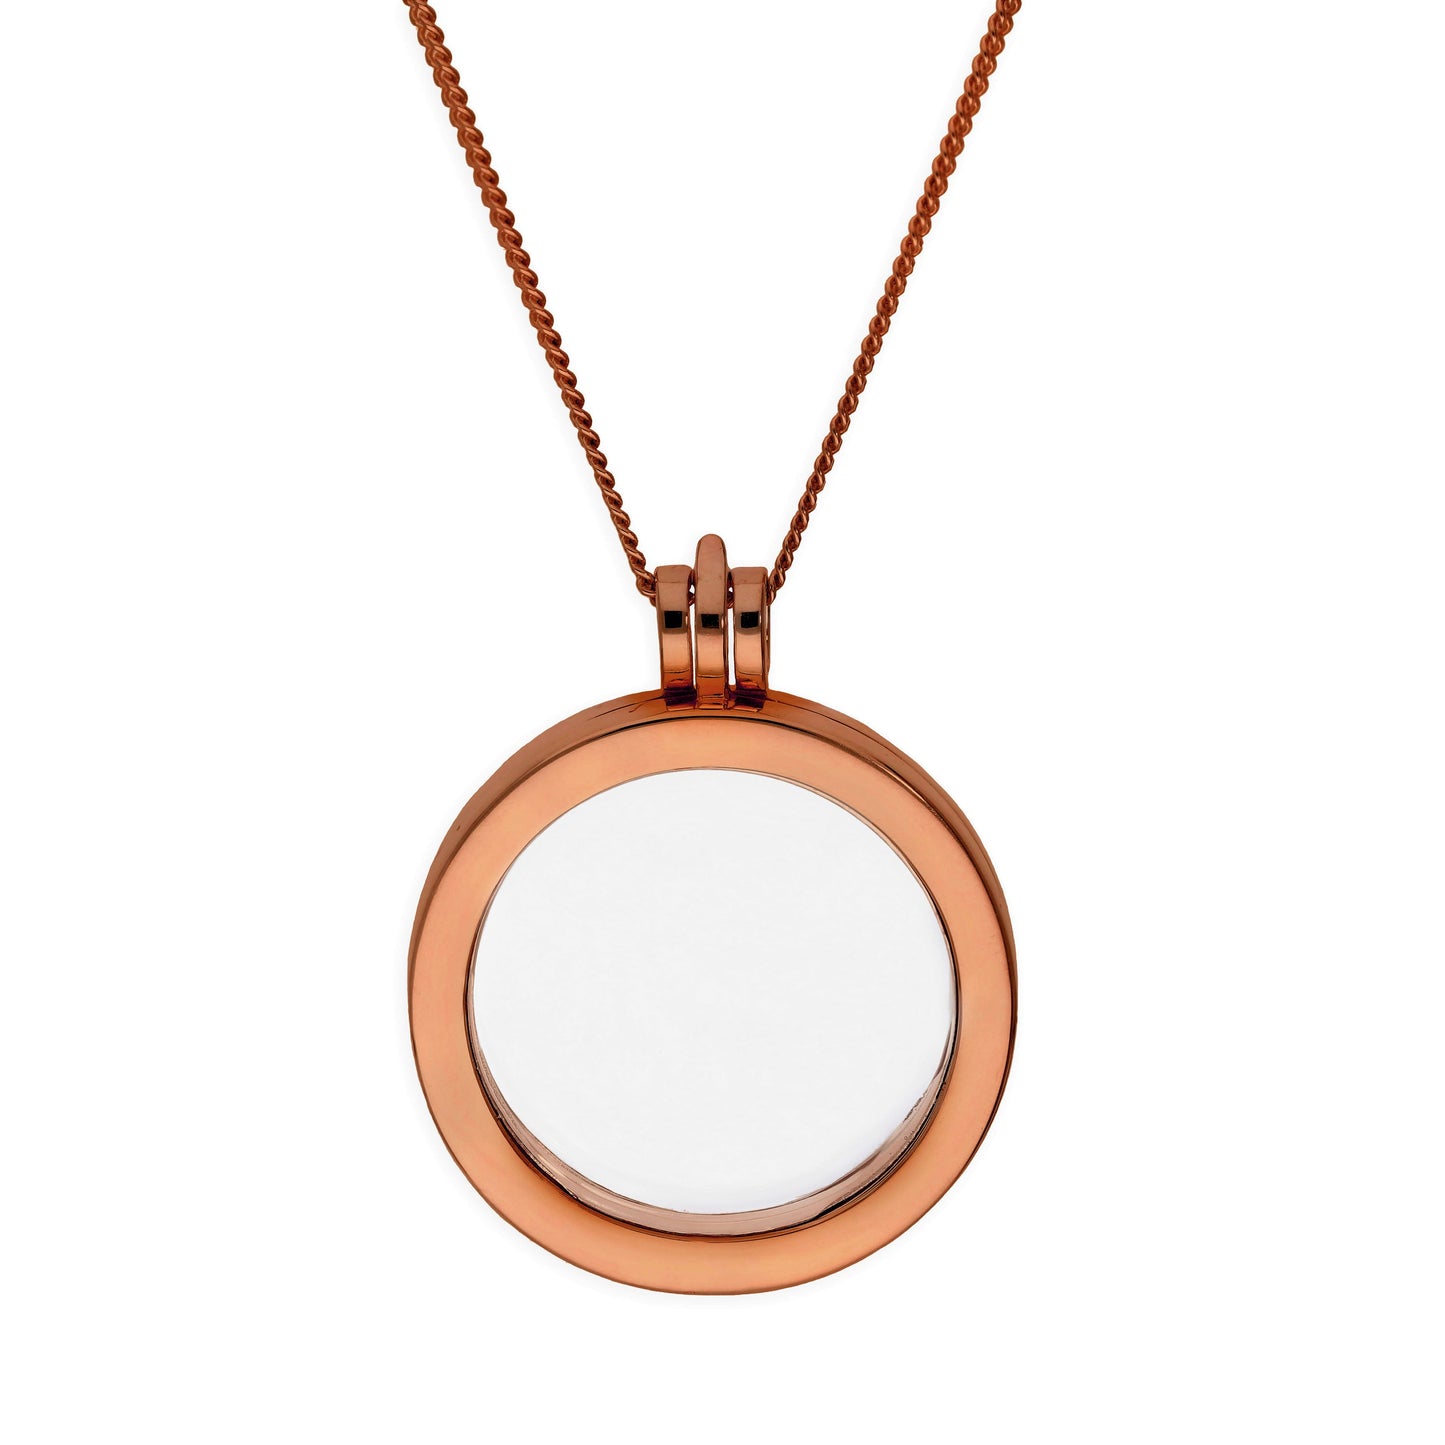 Large Rose Gold Plated Sterling Silver Round Floating Charm Locket on Chain 16 - 24 Inches